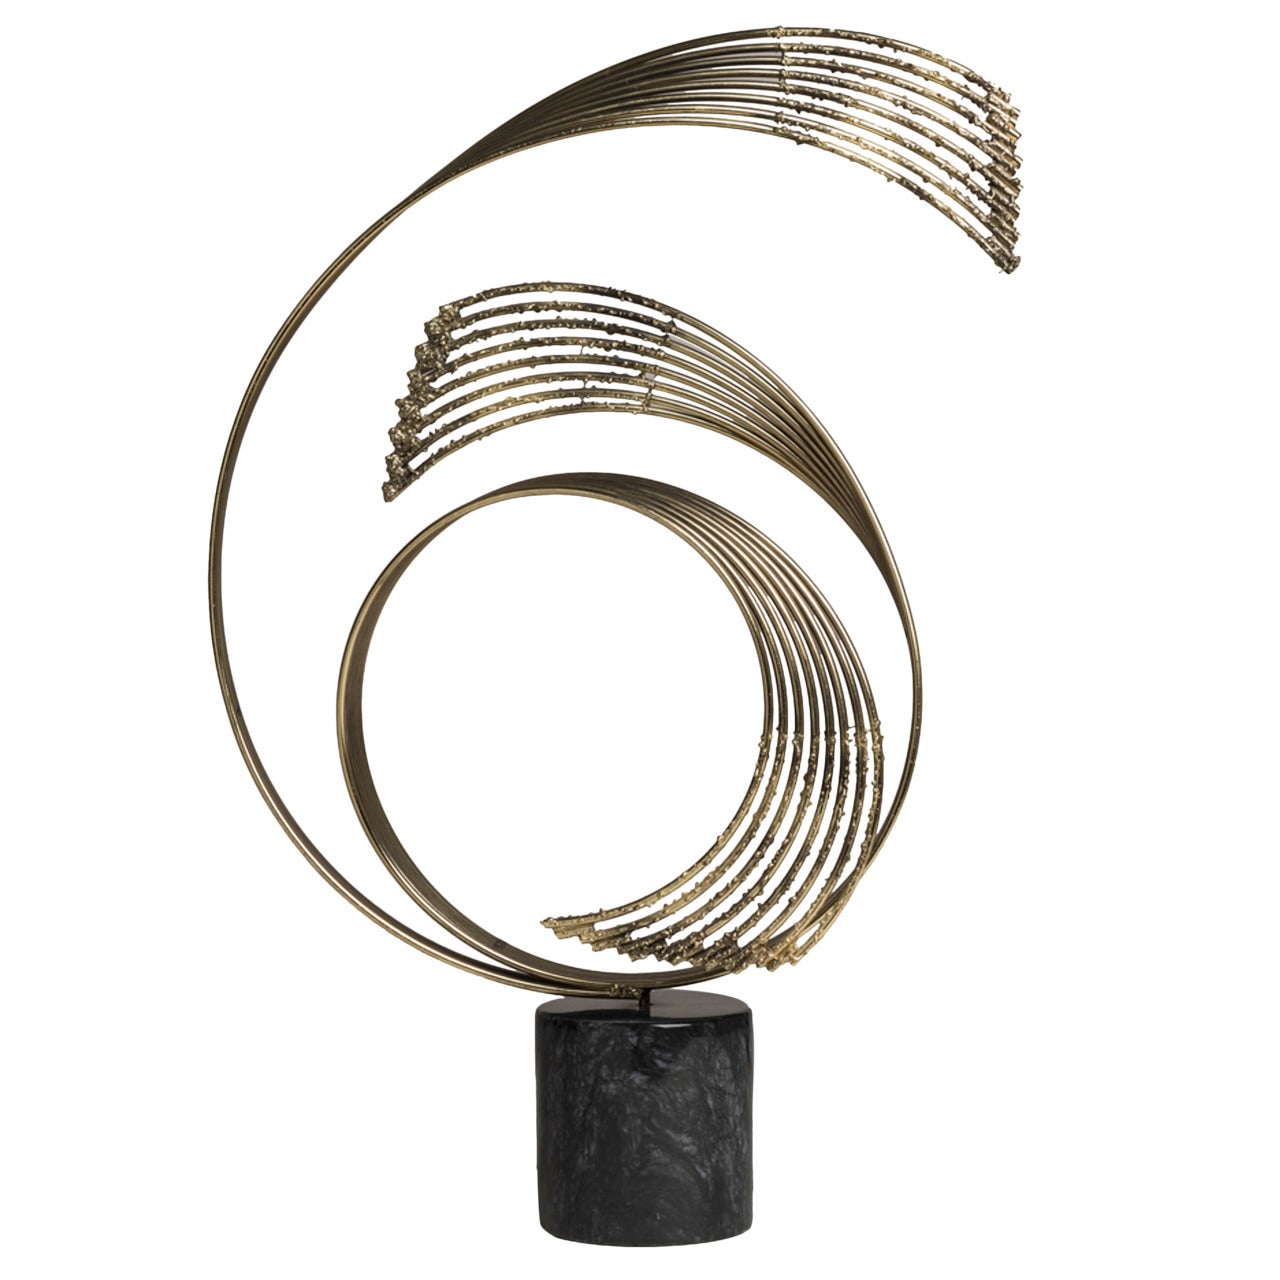 A Bronze Wave Table Sculpture by Curtis Jere 1970s